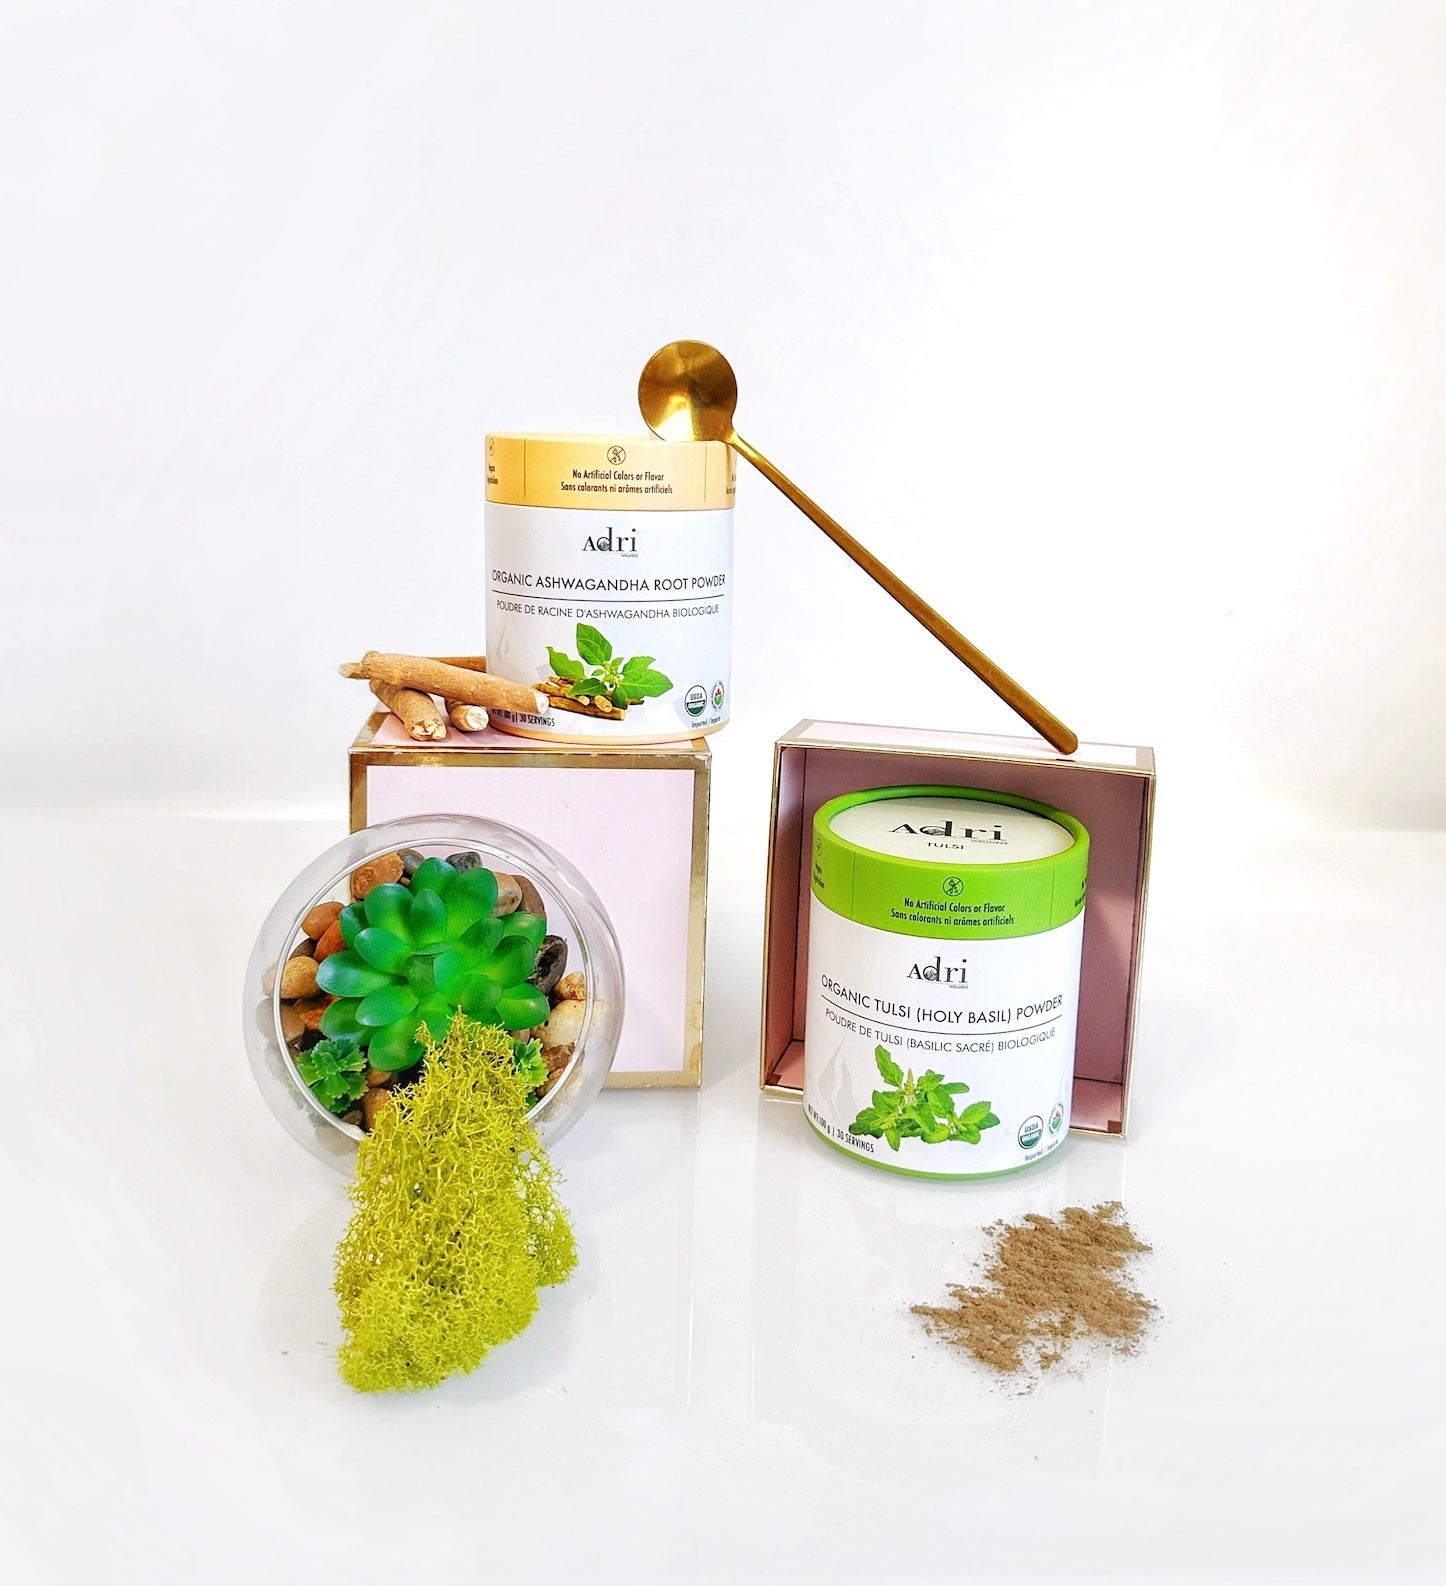 Adri Wellness Ashwagandha and Tulsi powder showcased together with a golden spoon, raw ashwagandha root, andfaux grass